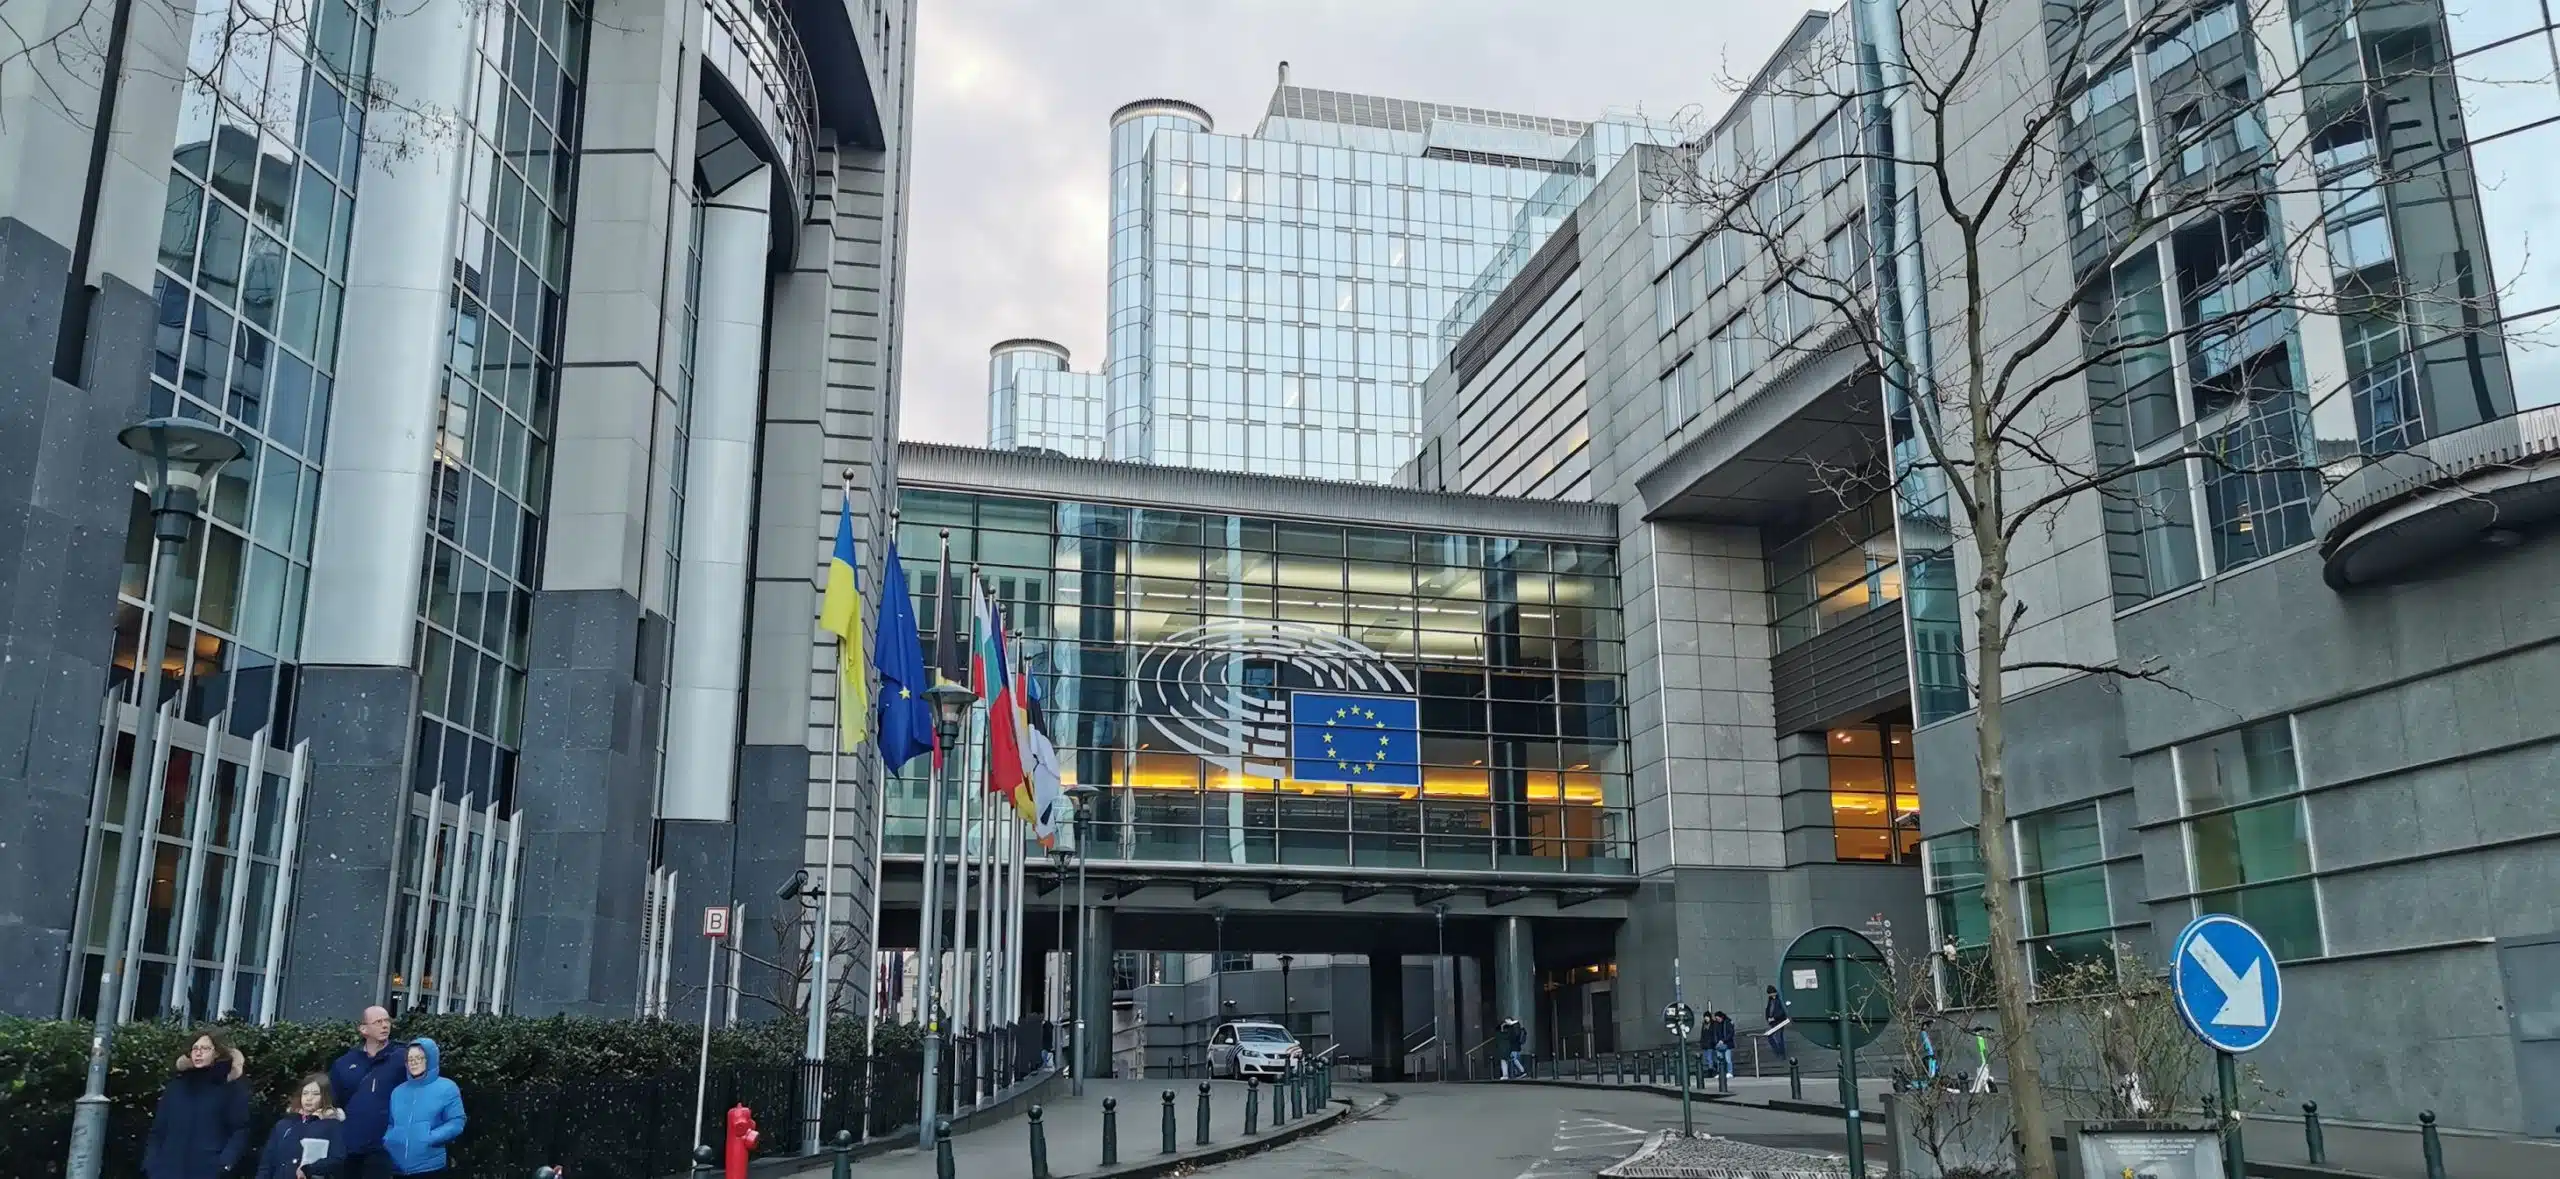 Andrea Cozzolino and Marc Tarabella, two MEPS, have had their parliamentary immunity waived due to alleged involvement in the Qatargate scandal